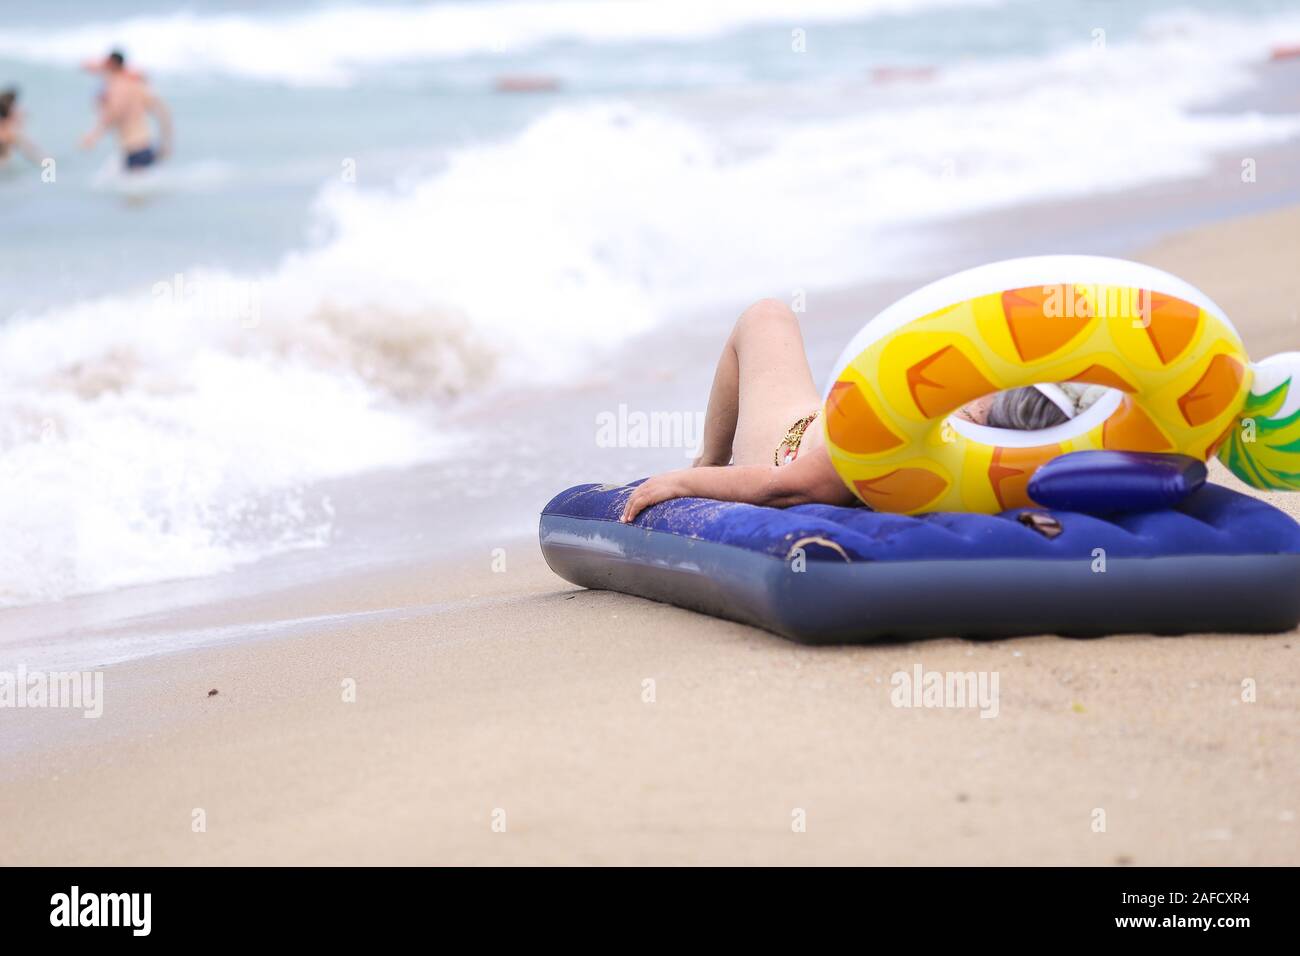 Elderly woman resting on an inflatable mattress on the beach near the water Stock Photo